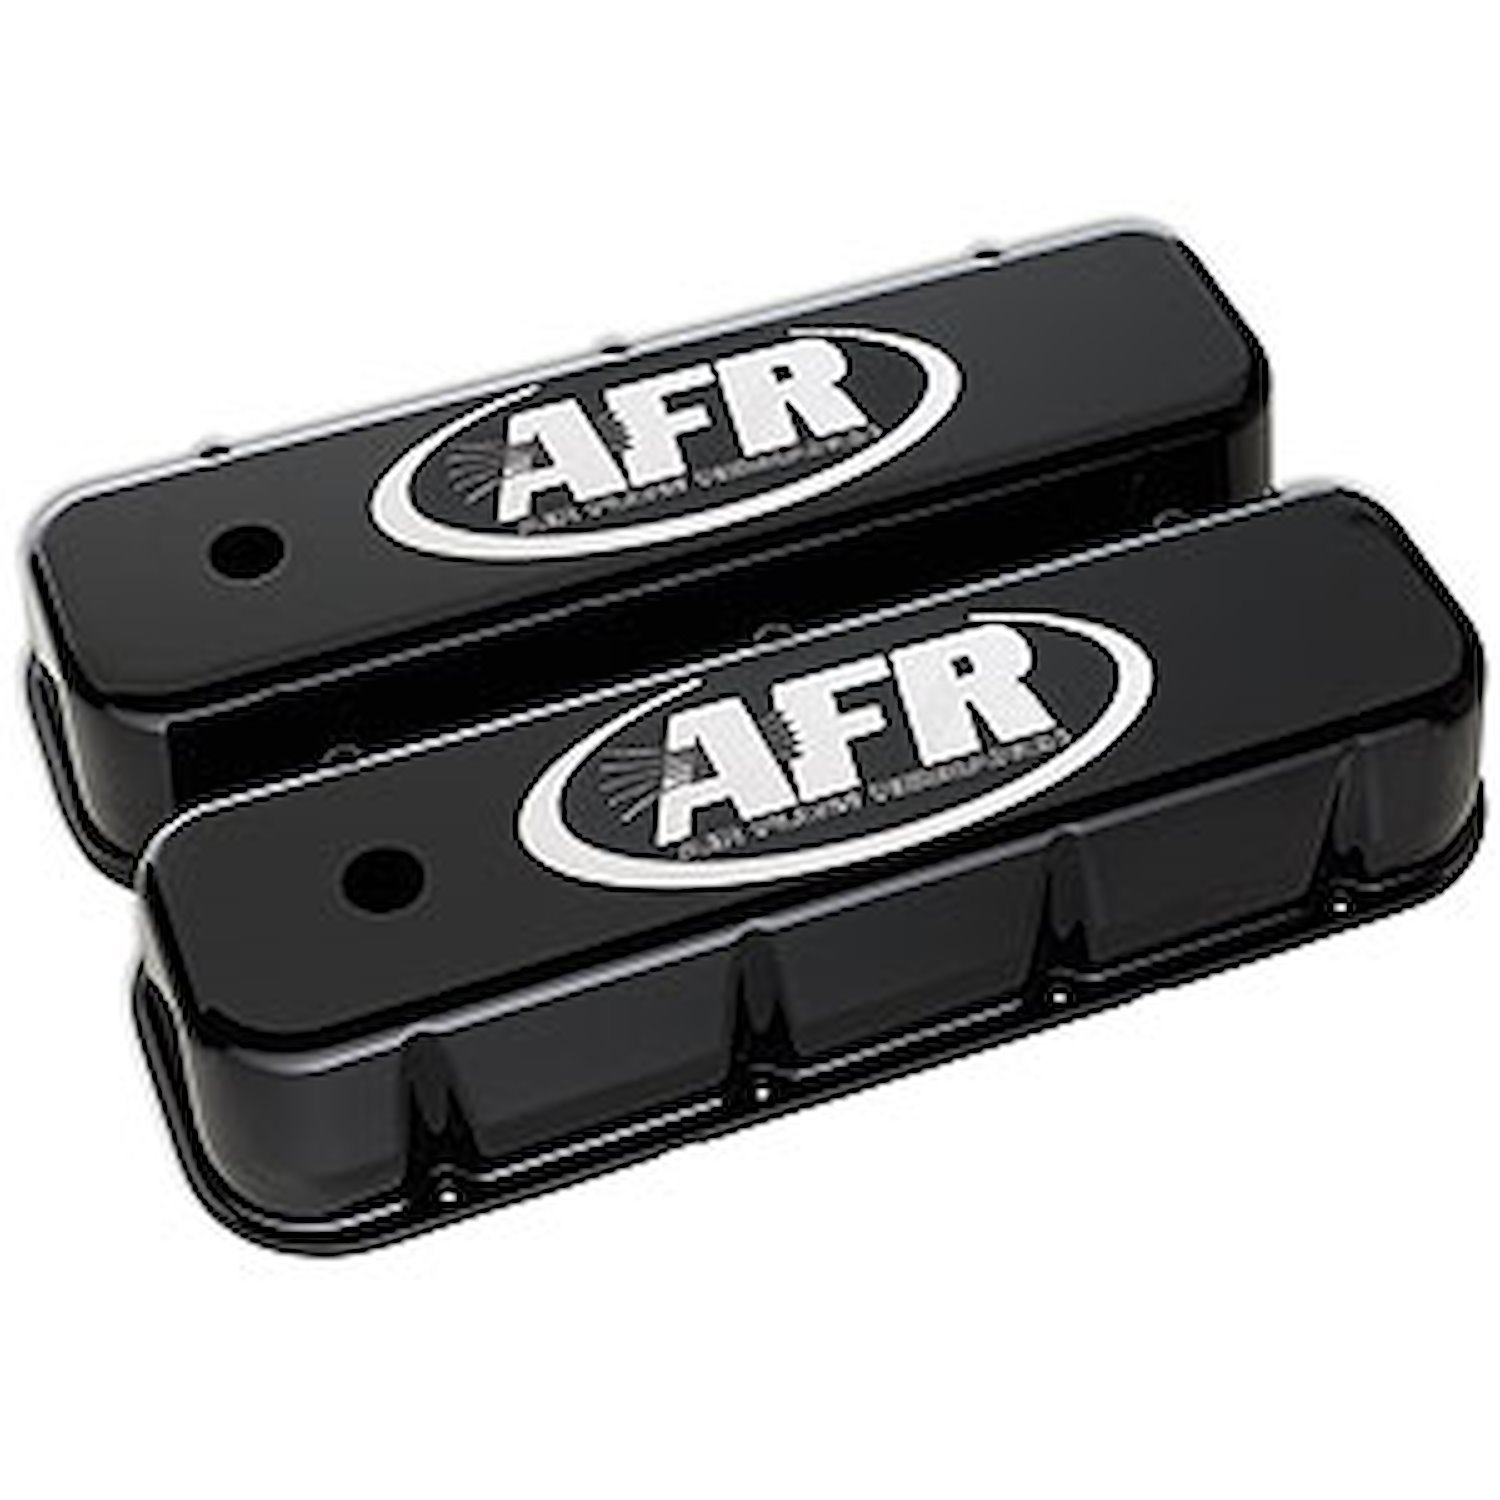 Cast Aluminum Tall Valve Covers for Big Block Chevy [Black]